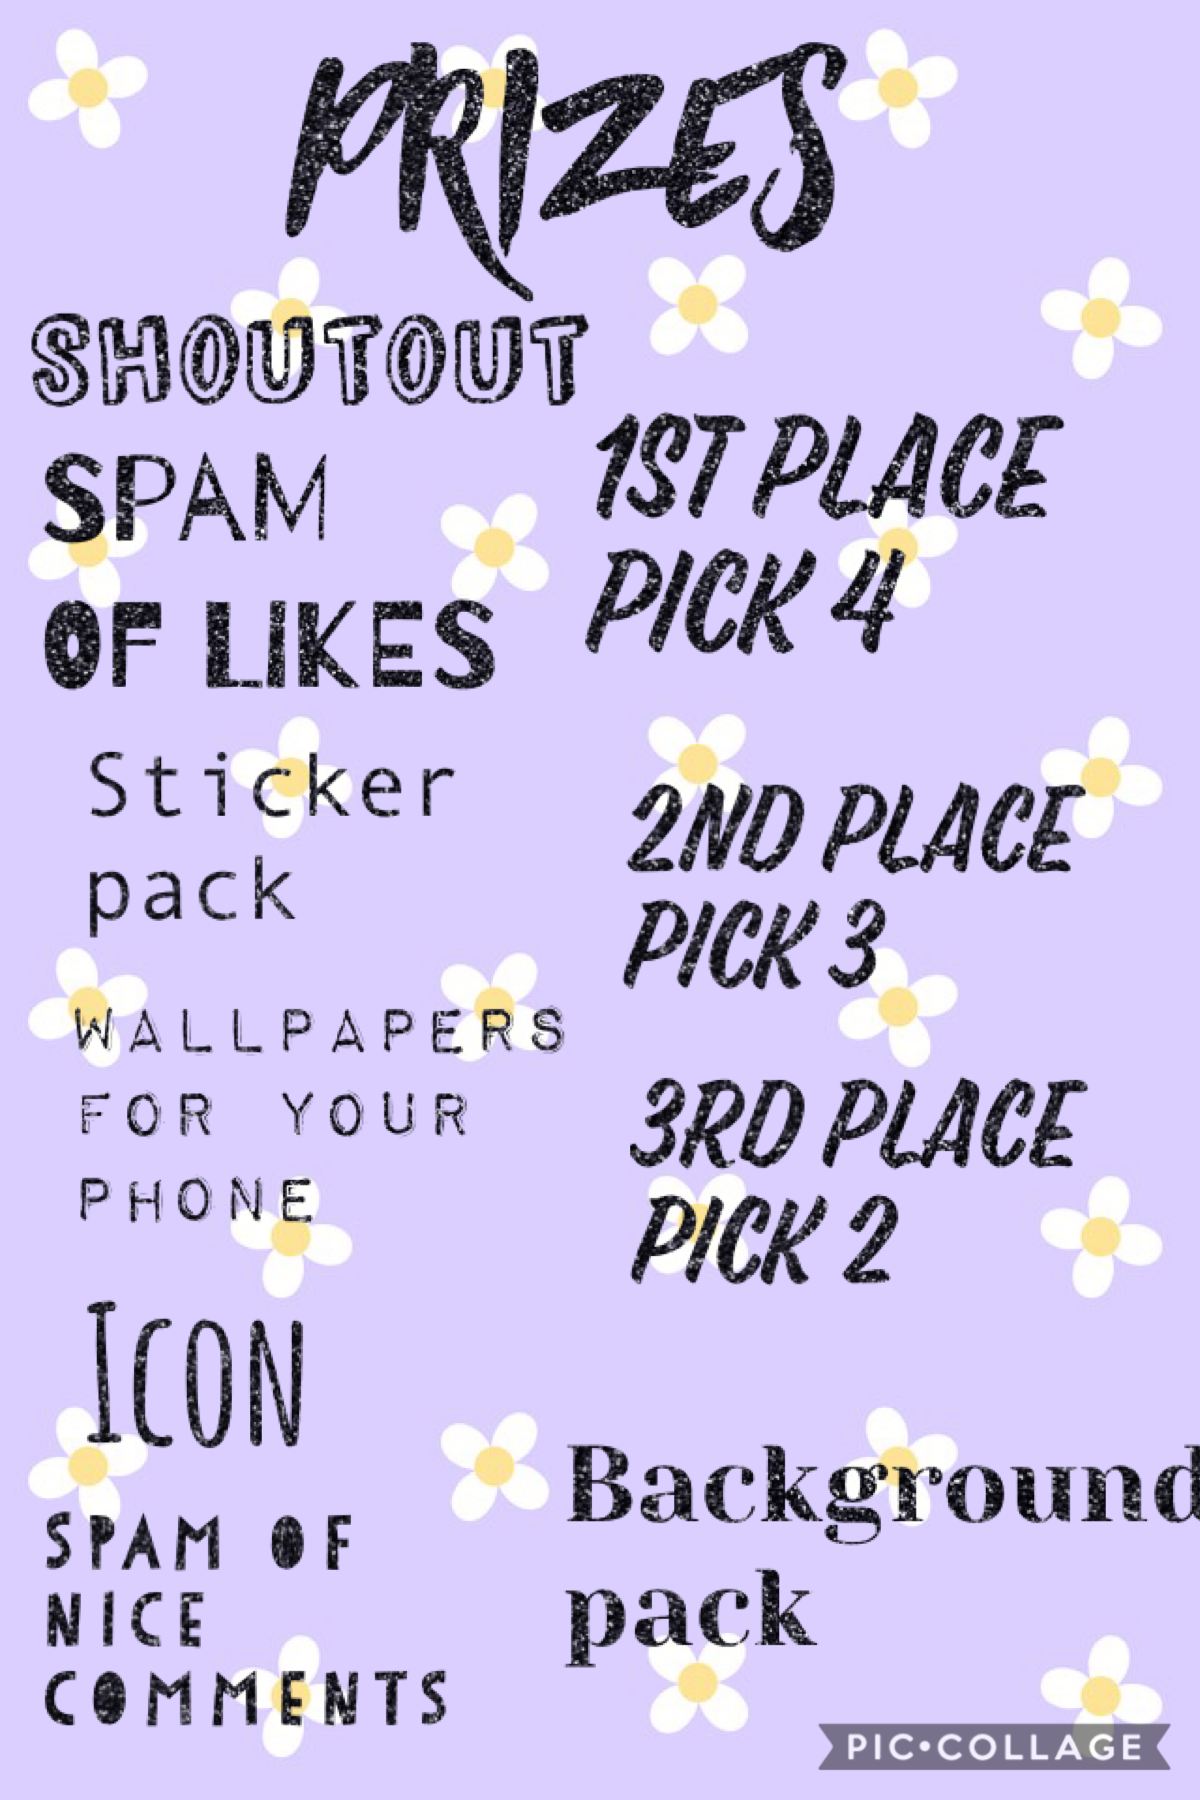 These are the prizes for the contest winners!!!!!!!! Remember if you didn’t win I will have more contests up soon!!! Have a nice day Unicorns 🦄 